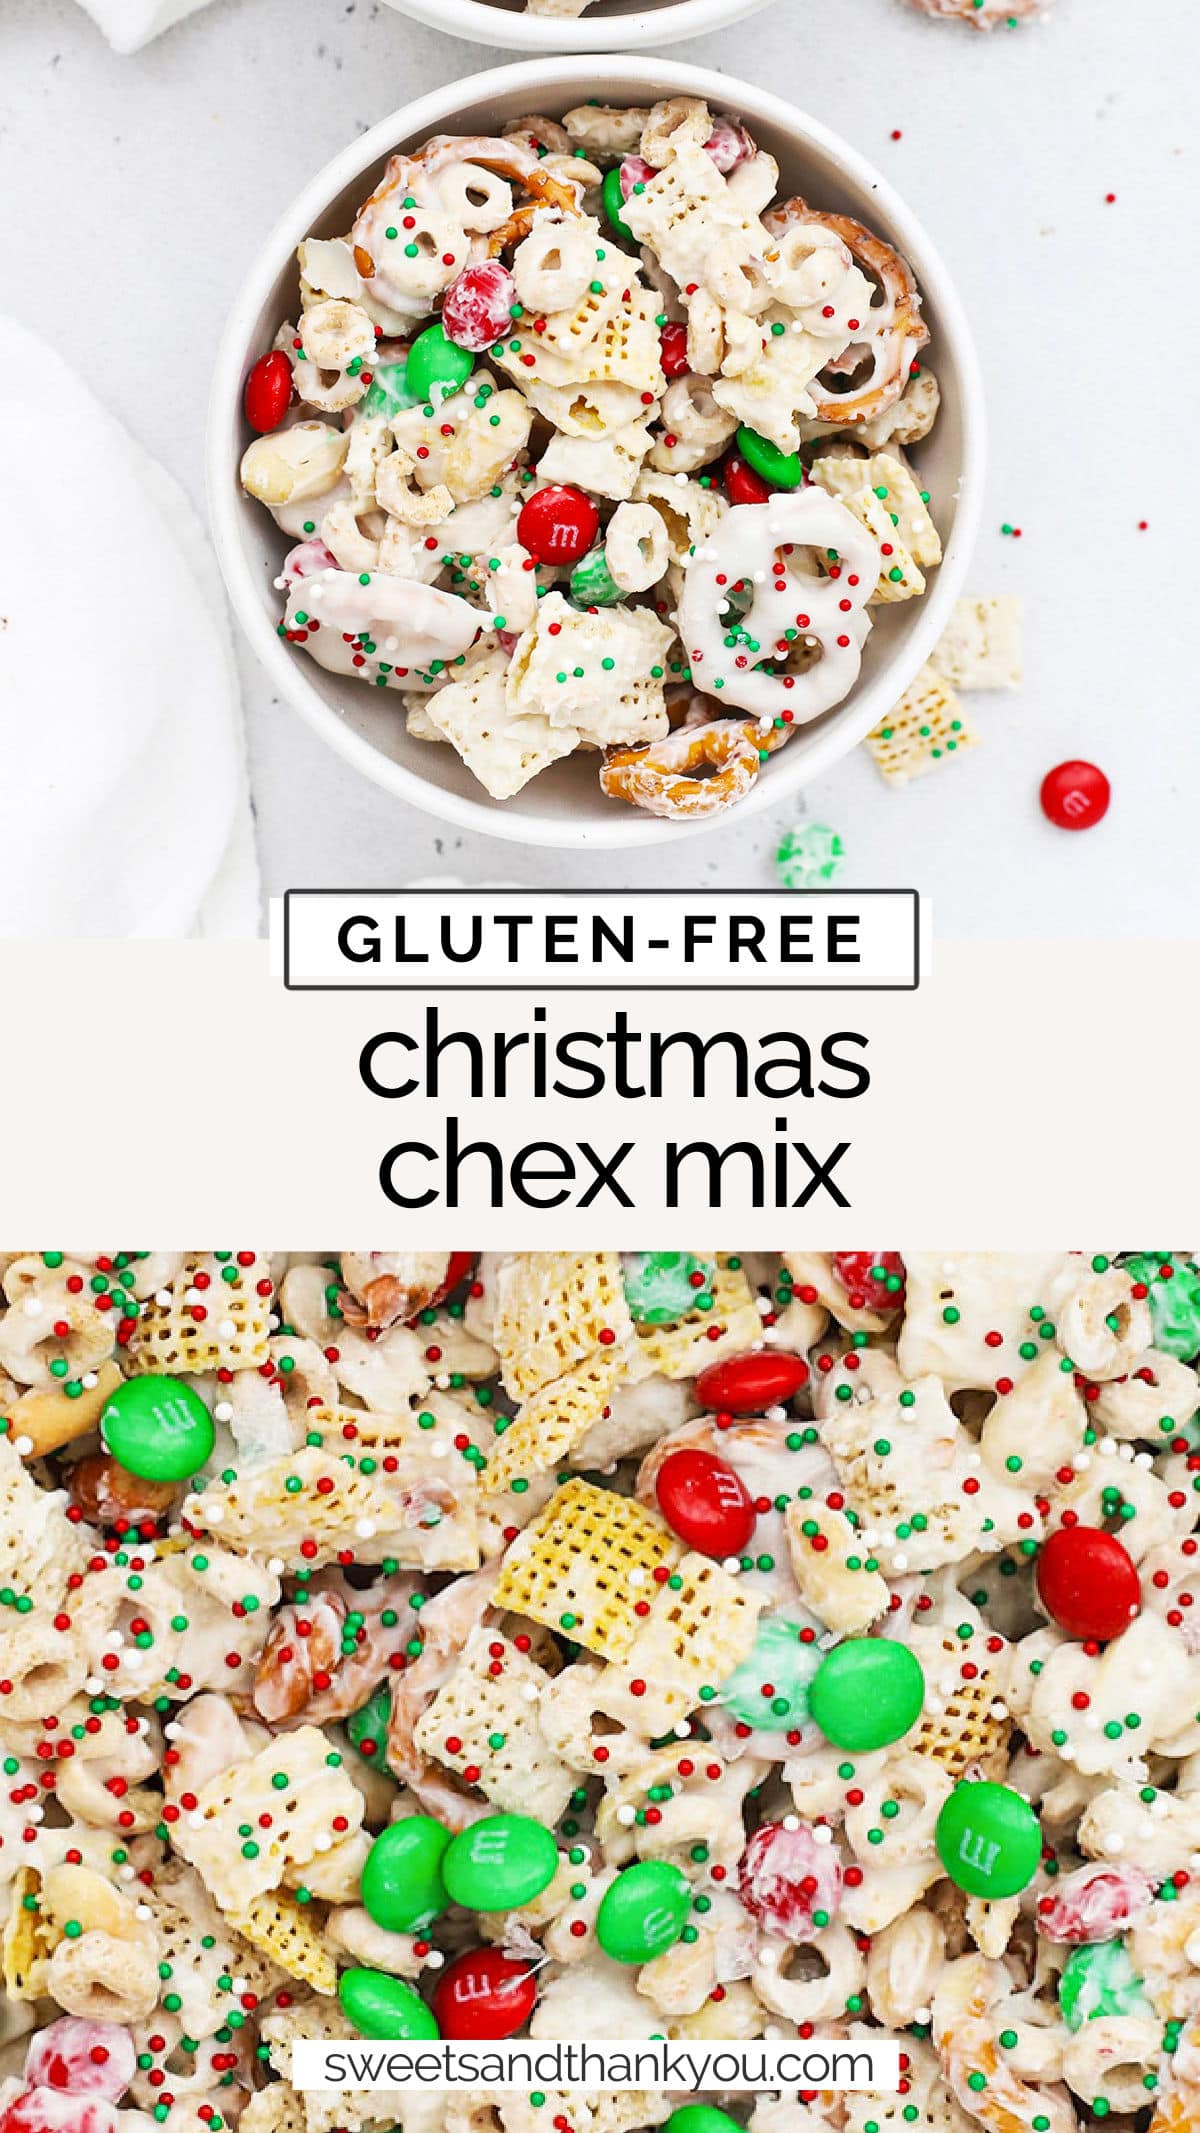 How to make gluten-free holiday chex mix - This easy gluten-free christmas chex recipe is so fun and festive! A perfect gift for friends & neighbors! / gluten-free holiday chex mix recipe / gluten-free chex mix recipe / gluten-free christmas crunch chex mix / gluten free chex mix with m&ms / no bake gluten-free christmas treats / gluten-free no-bake christmas recipes / gluten-free christmas treats / gluten-free christmas snack mix / gluten-free christmas recipe